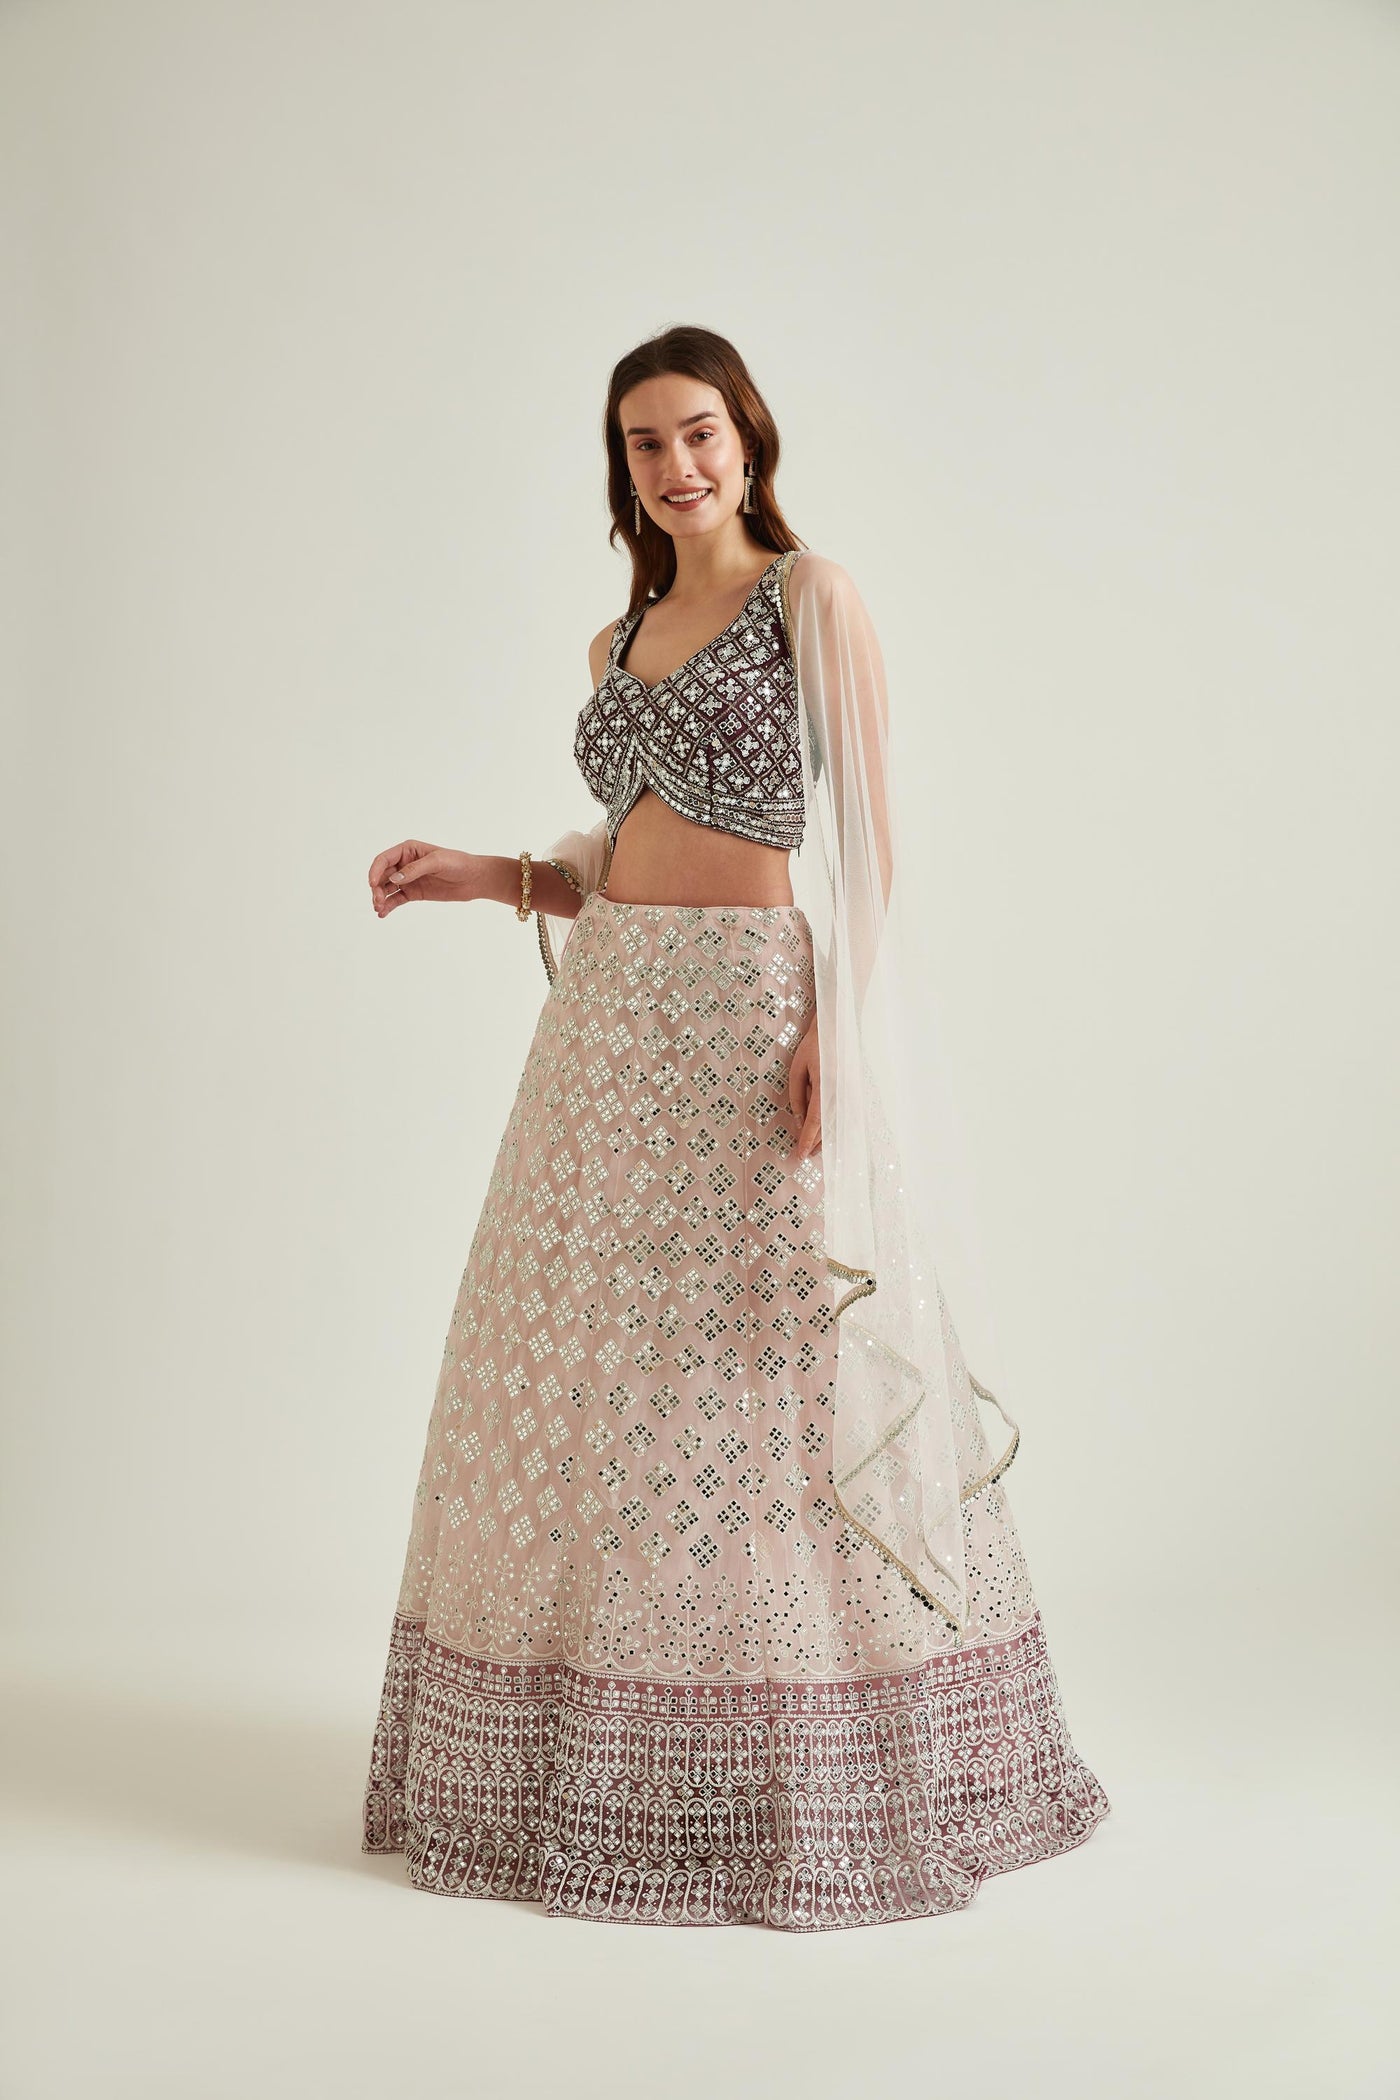 Neerus India - Your search for the perfect big day outfit comes to an end,  fall in love our your bridal collection and redefine your special day glam.  #NeerusIndia #Neerus #Indian #Lehenga #